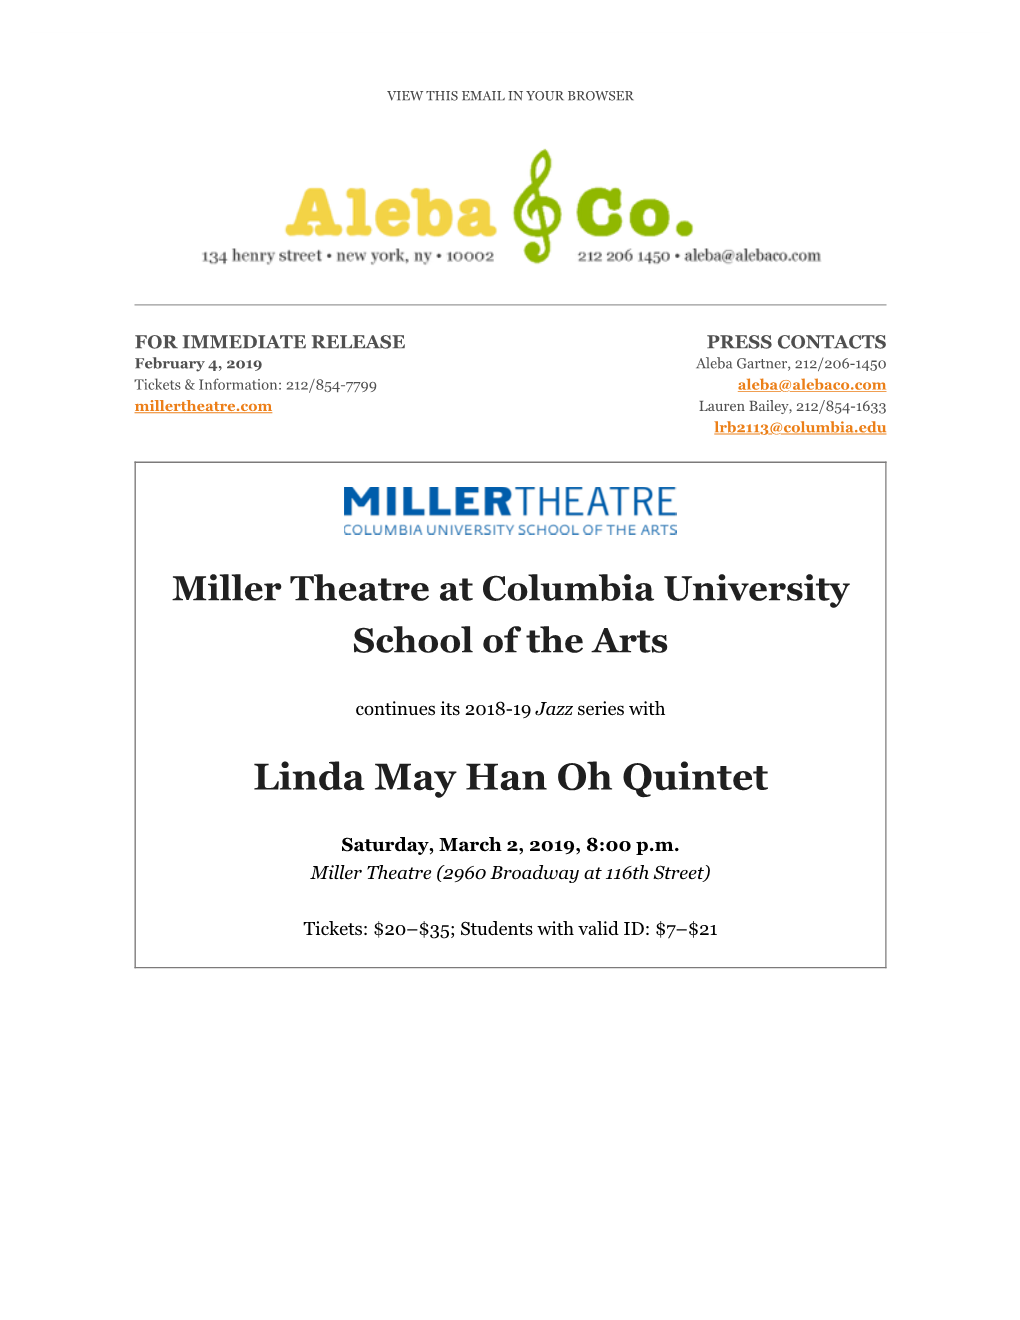 Linda May Han Oh Quintet to Perform on Miller Theatre's Jazz Series